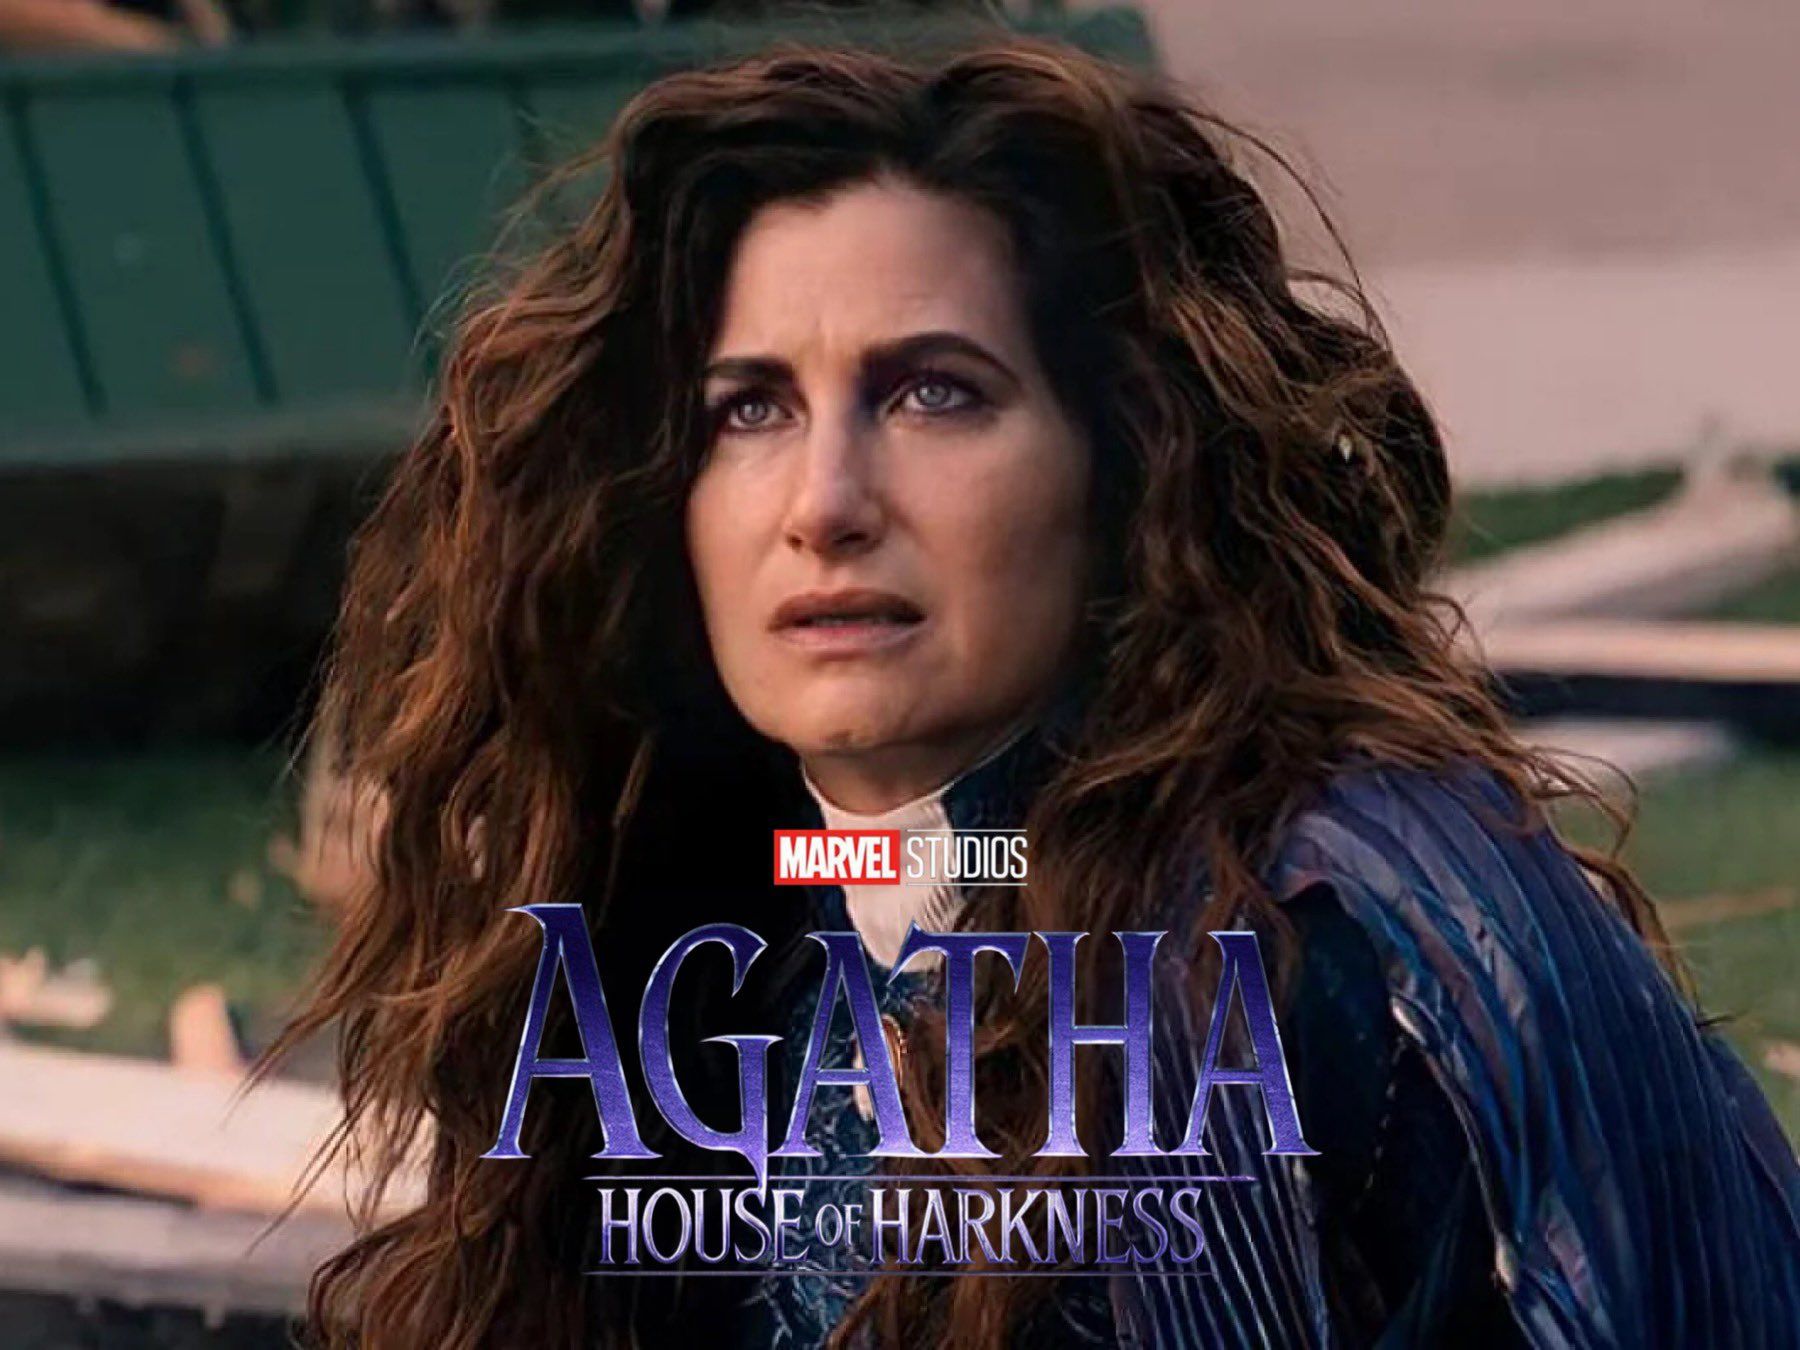 Who is Agatha Harkness?